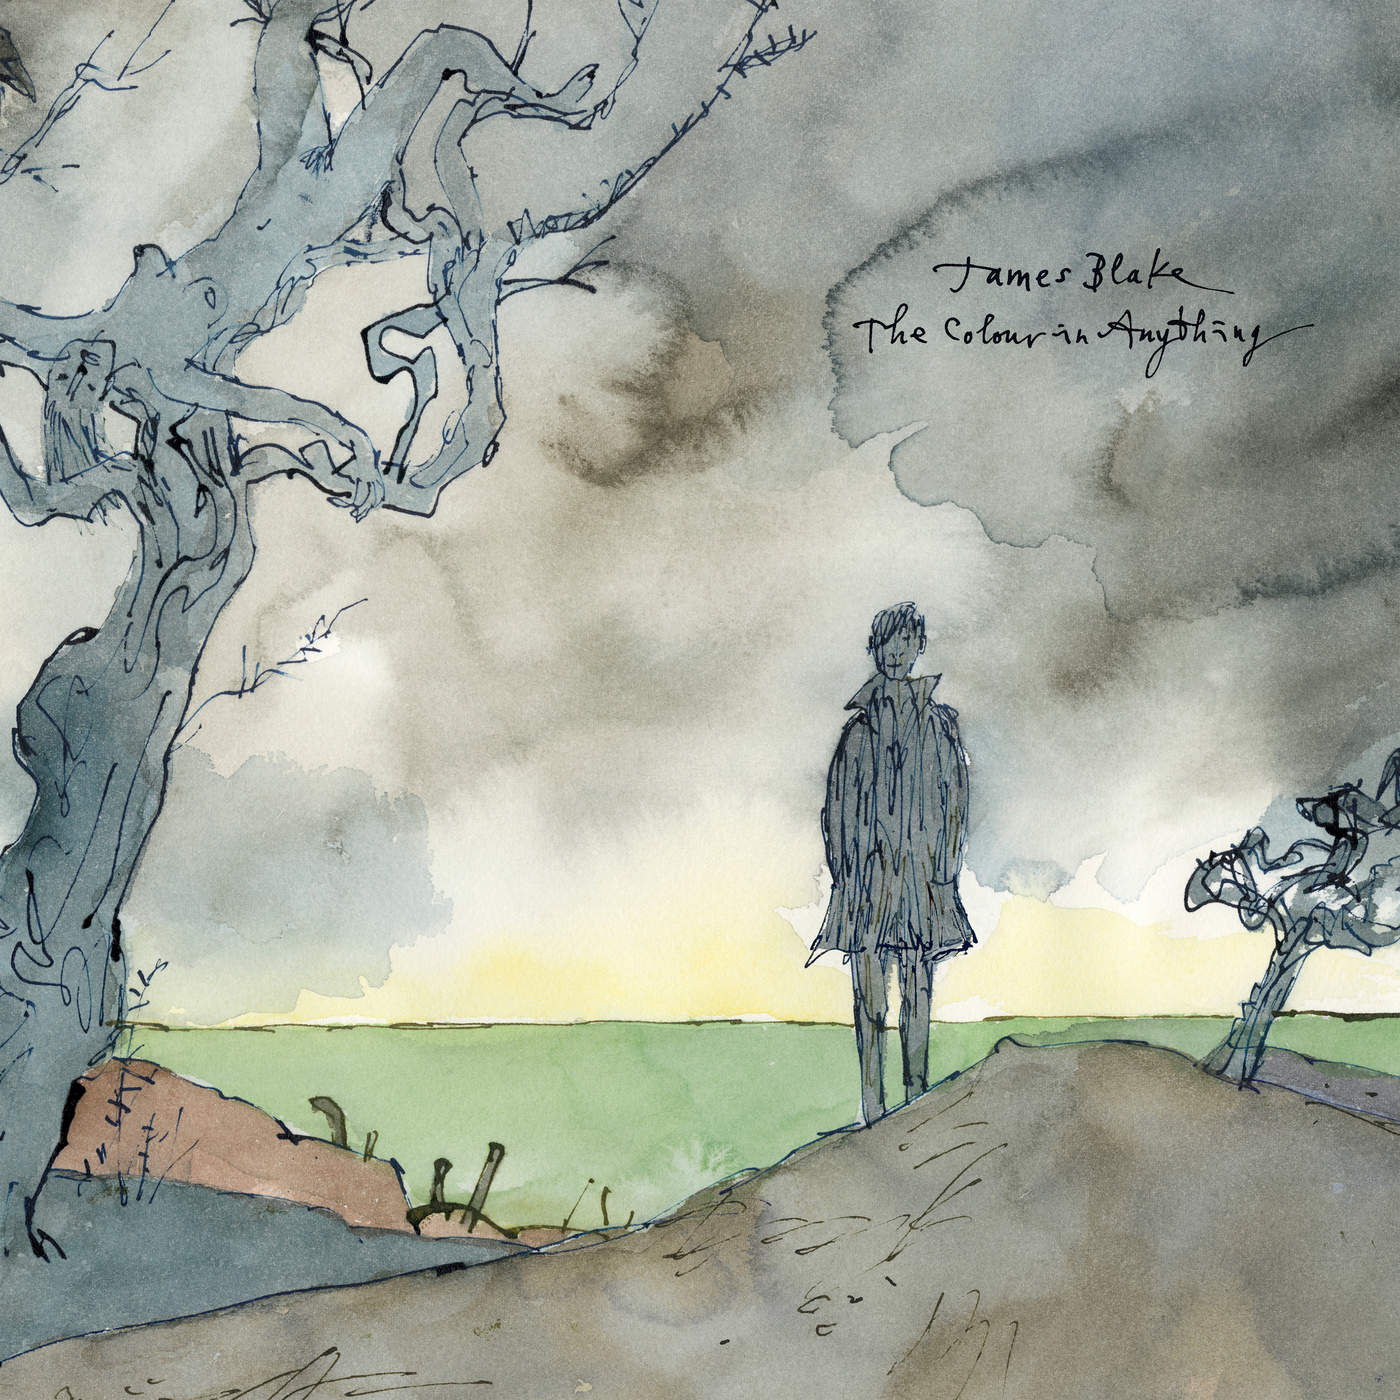 32 James Blake - The Colour in Anything (Electronic).jpg